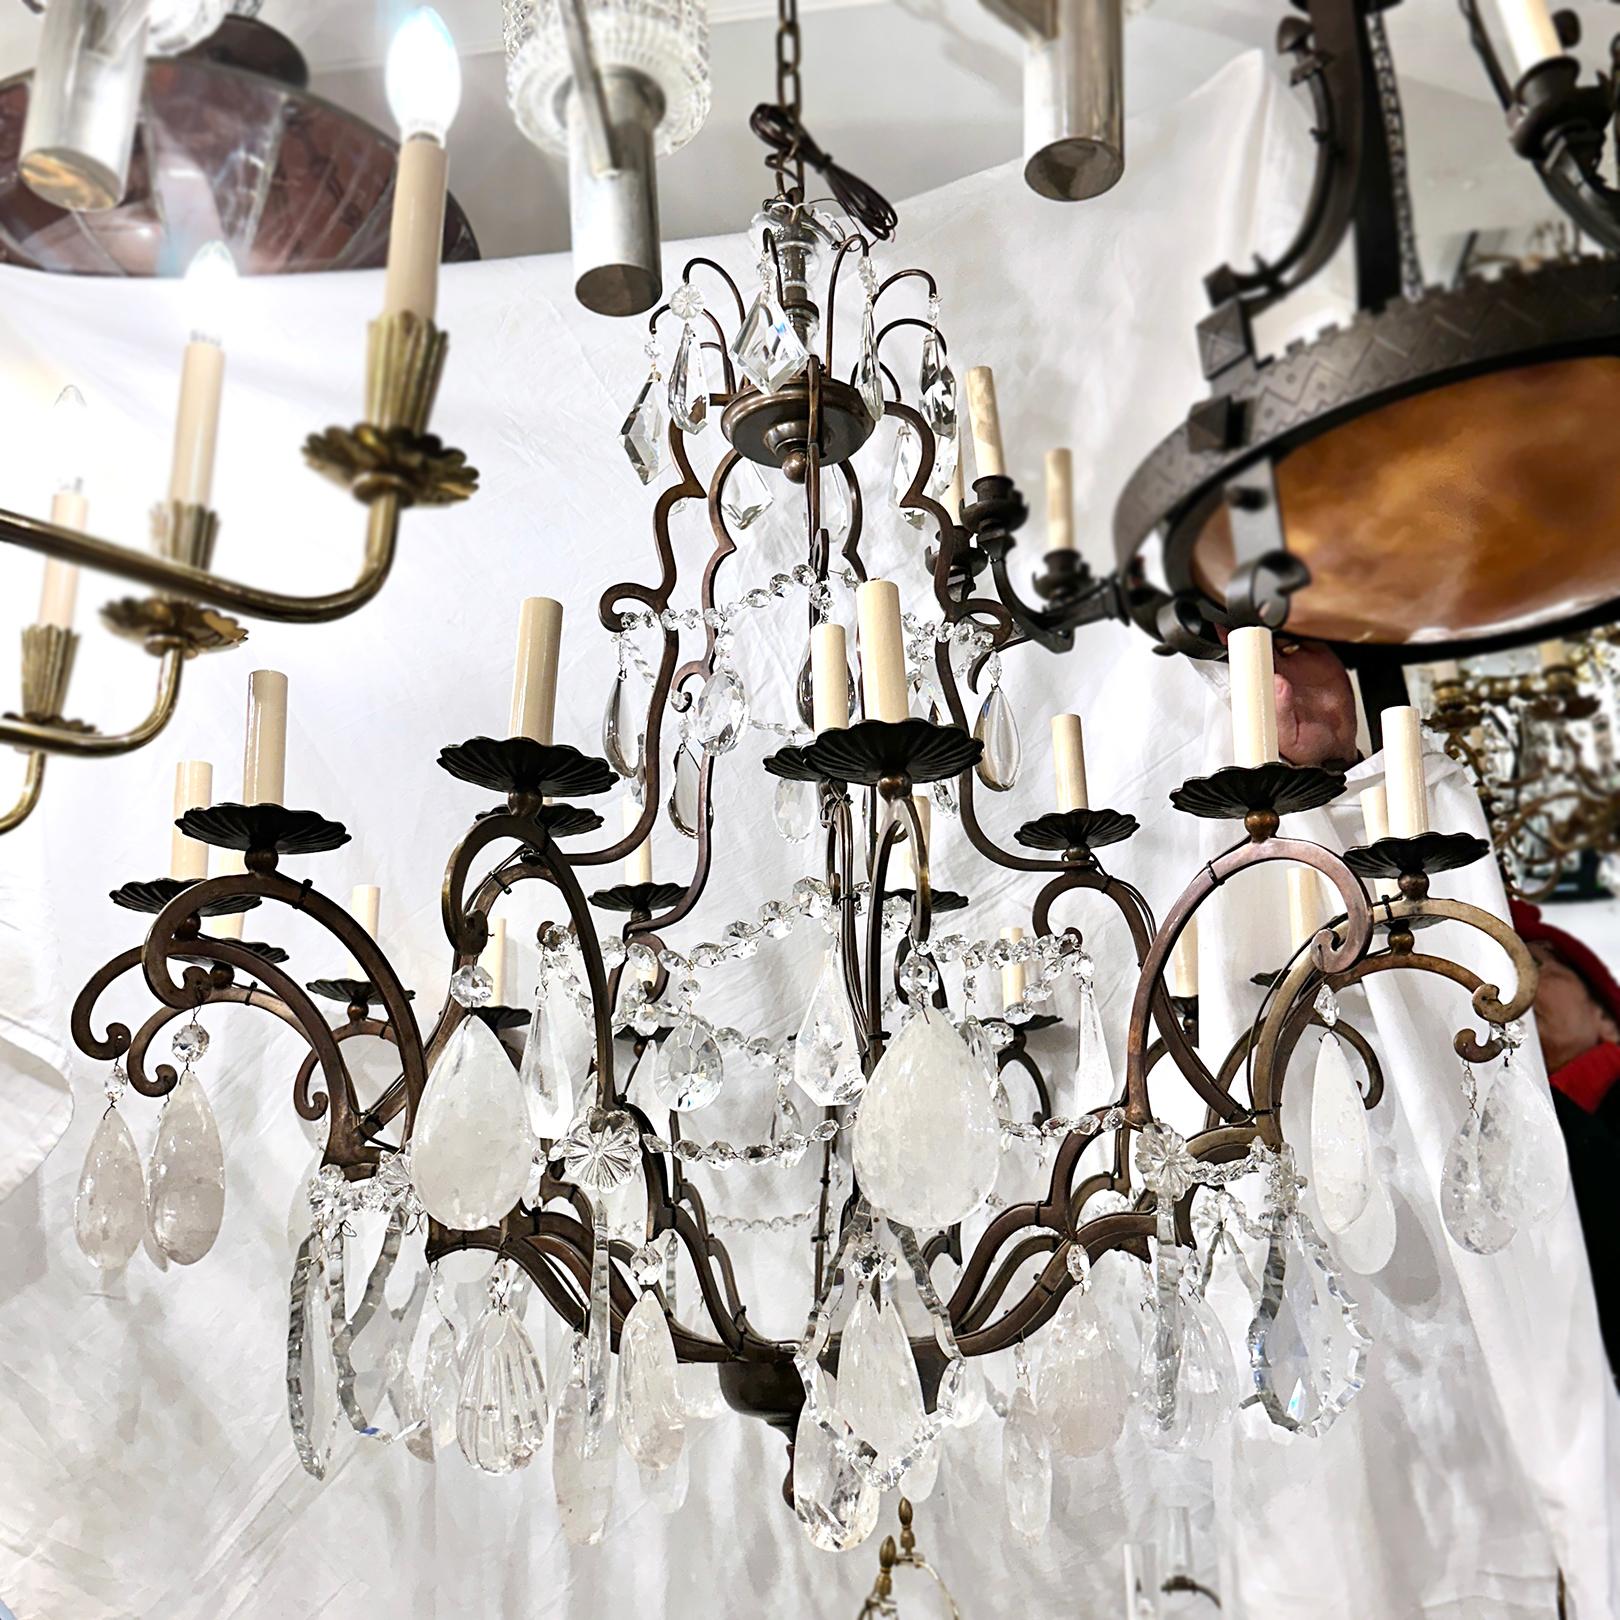 A circa 1950's French patinated bronze chandelier with 20 lights and with rock crystal pendants.

Measurements:
Minimum drop: 46